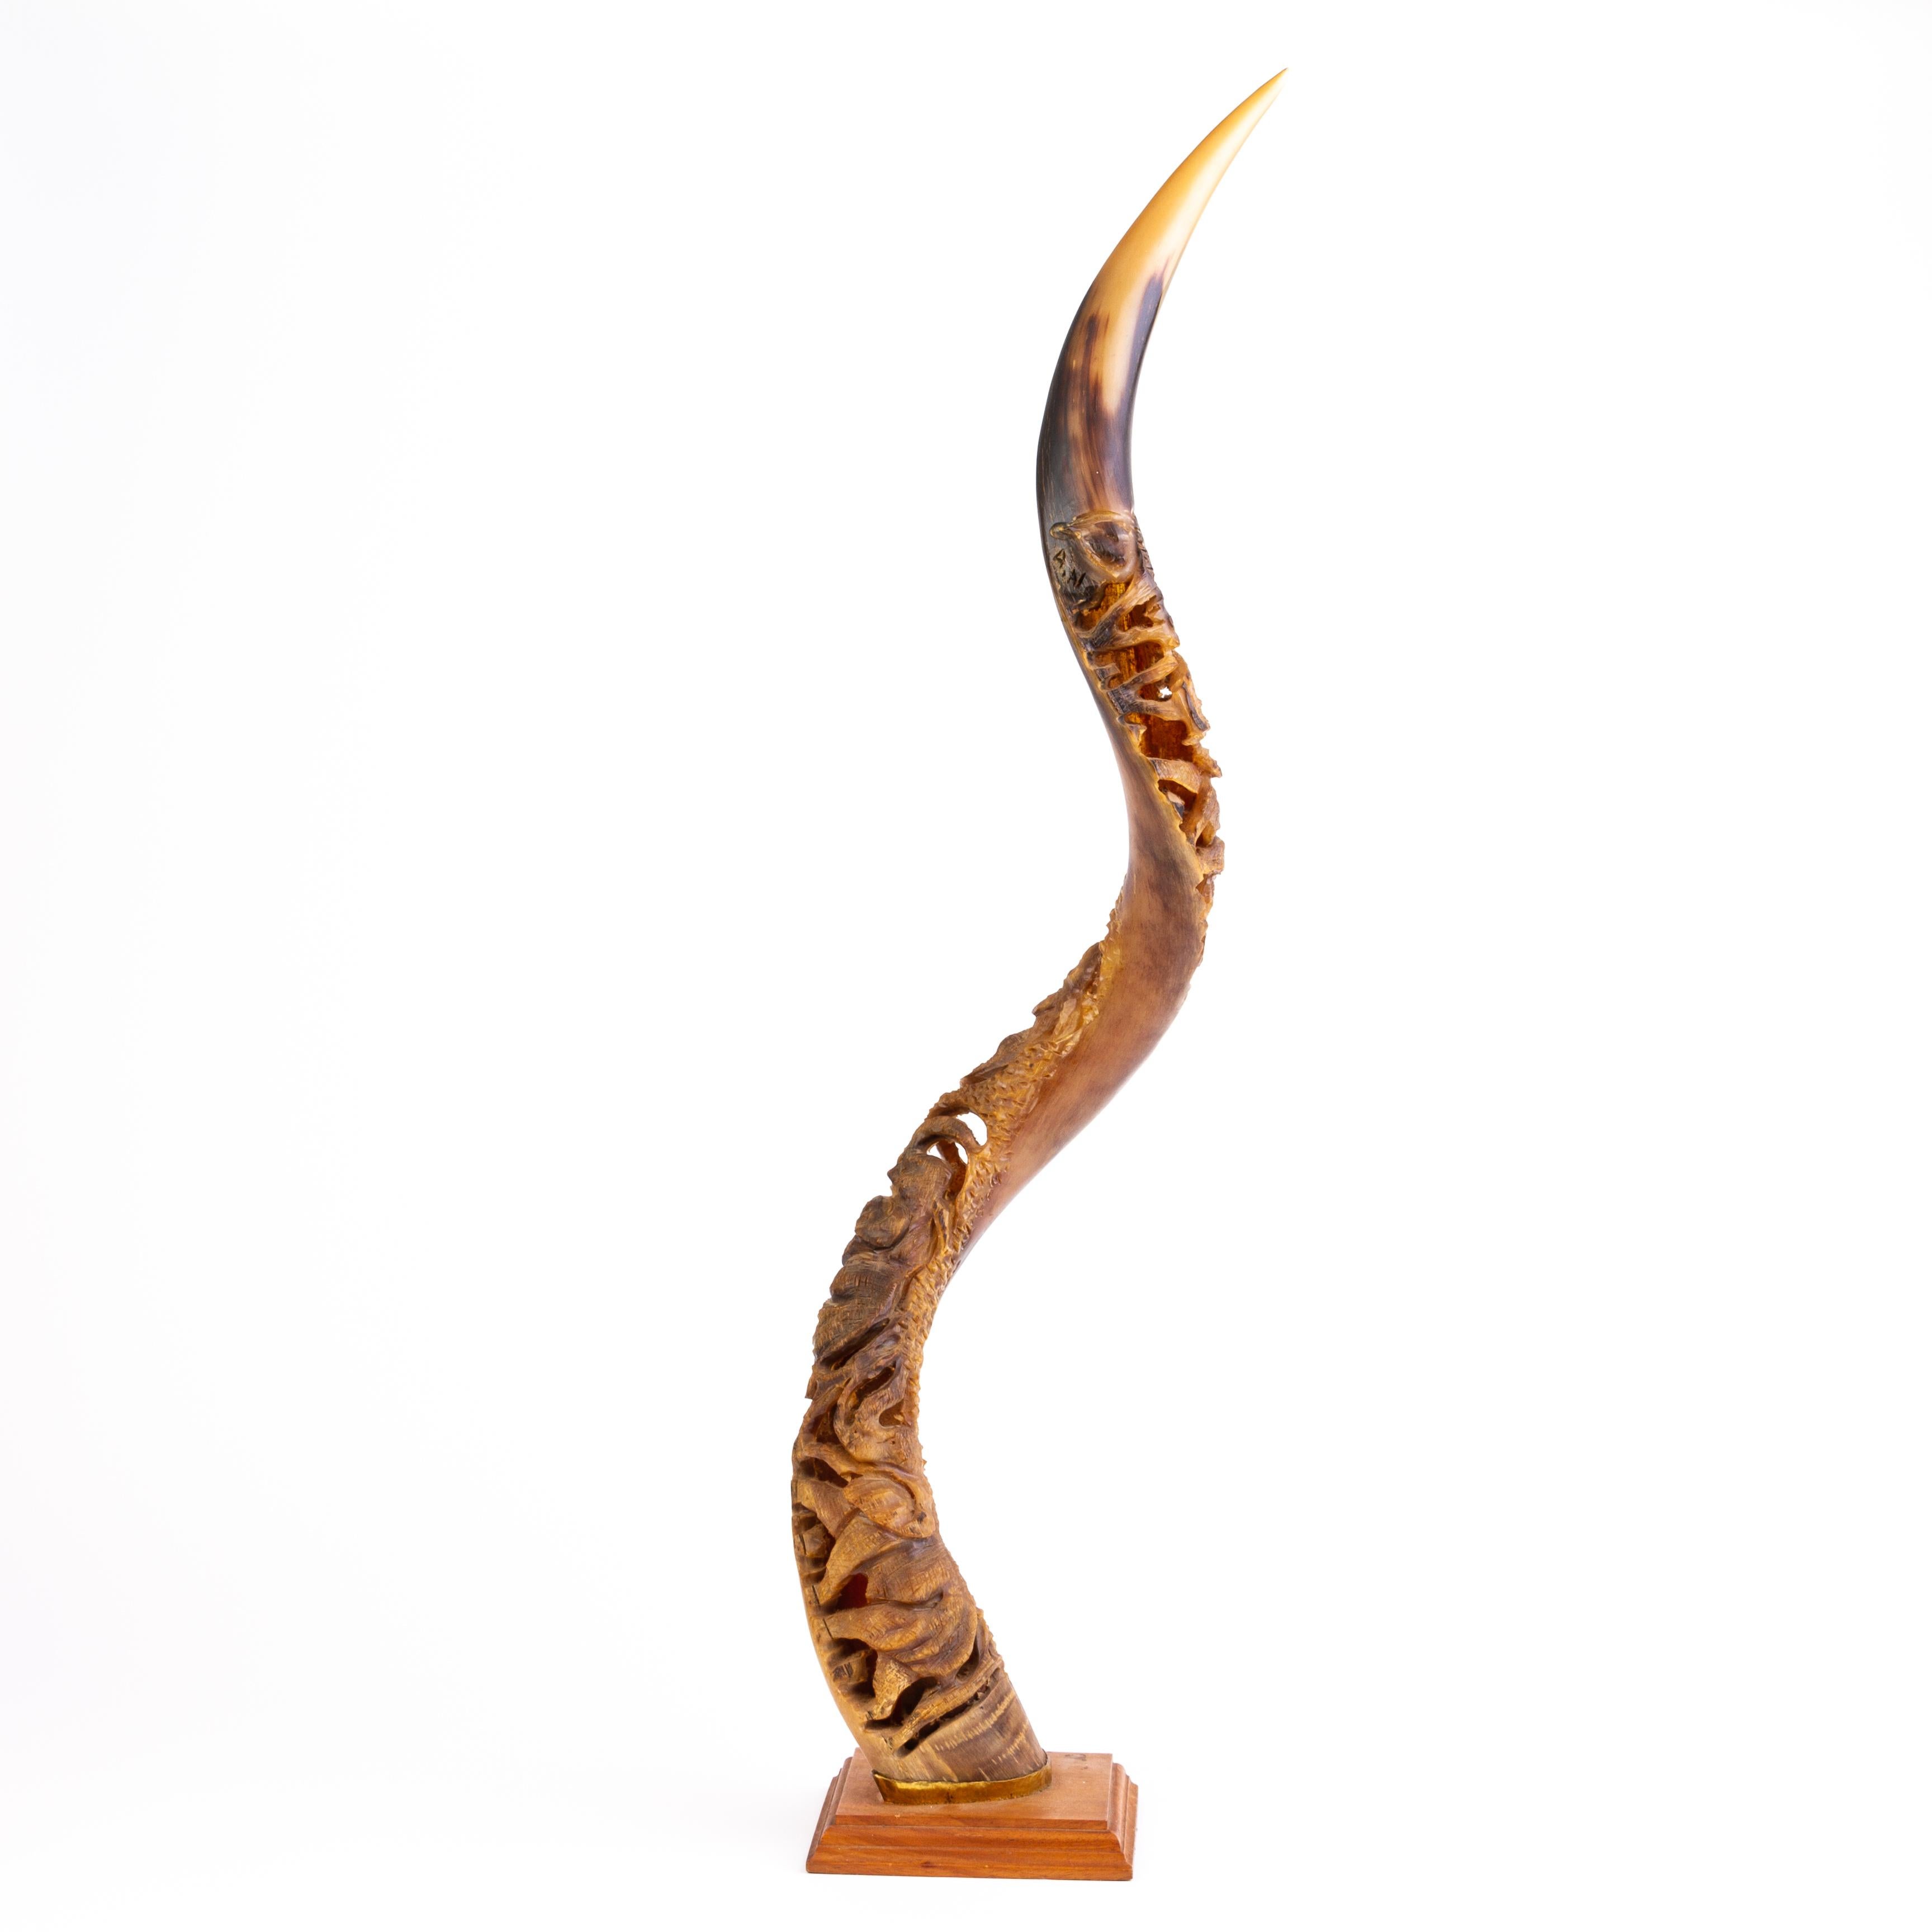 In good condition
From a private collection
Free international shipping
African Kudu Antelope Horn with Carved Elephants 